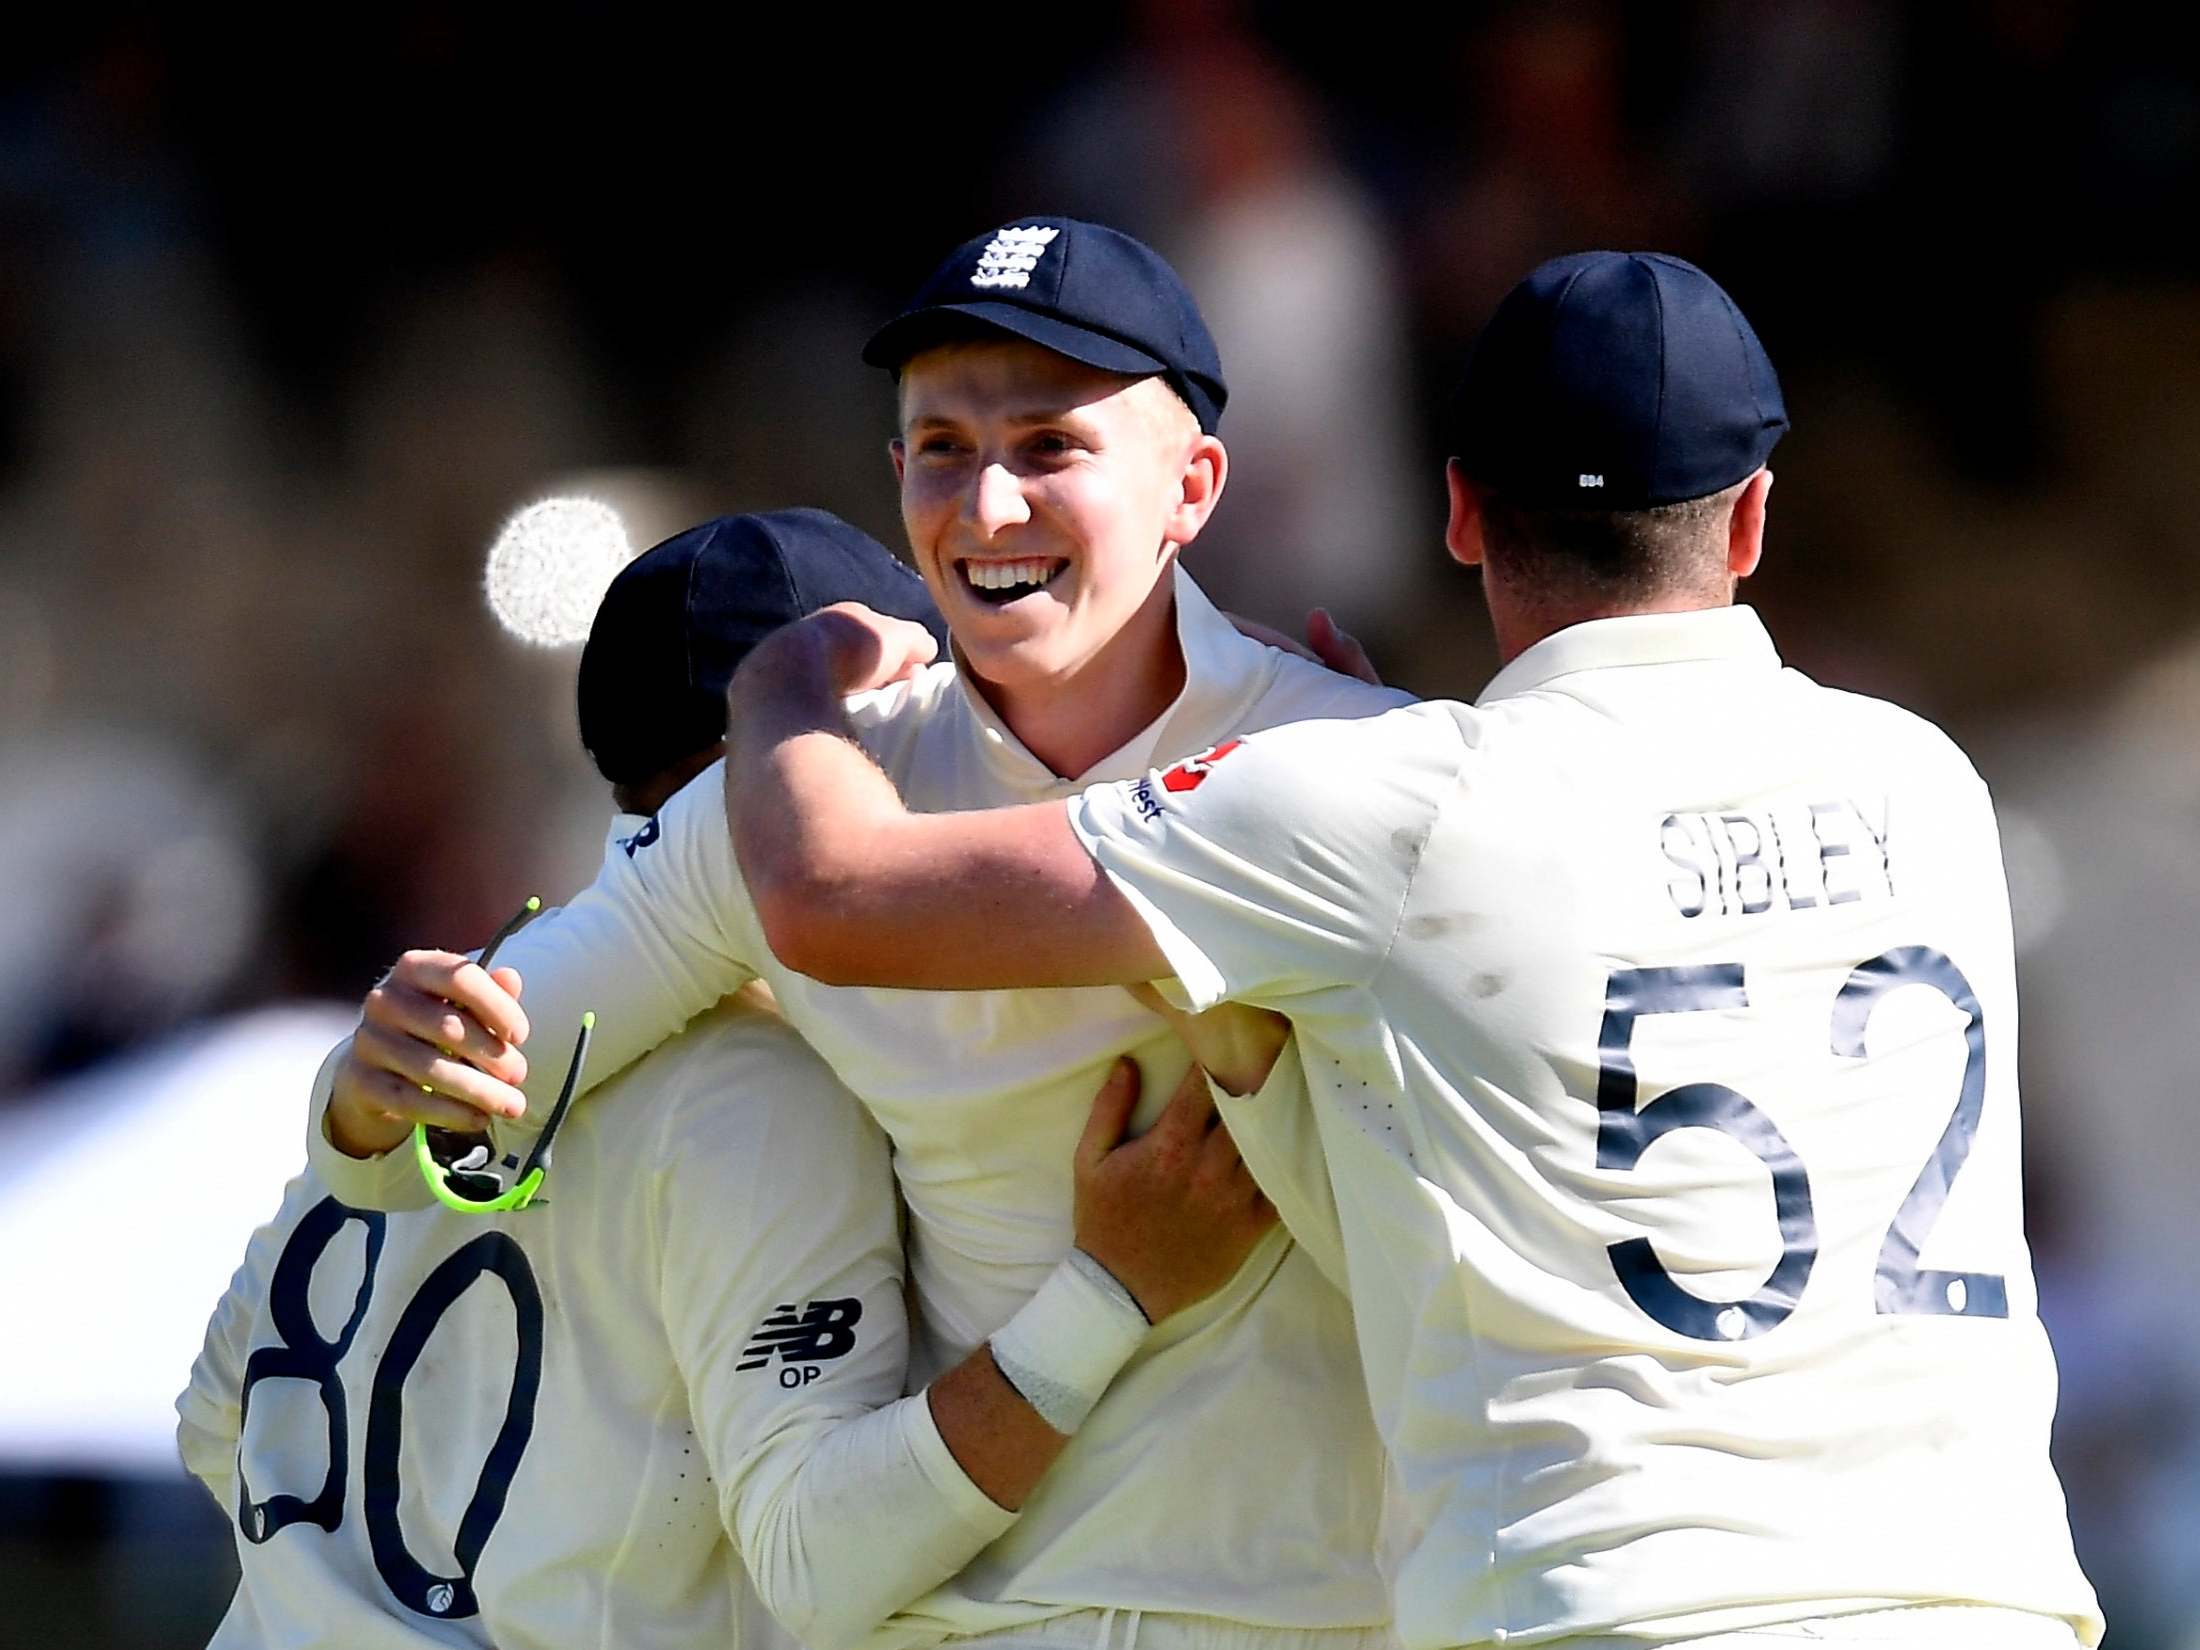 England produced an inspired final session to finally secure victory in Cape Town